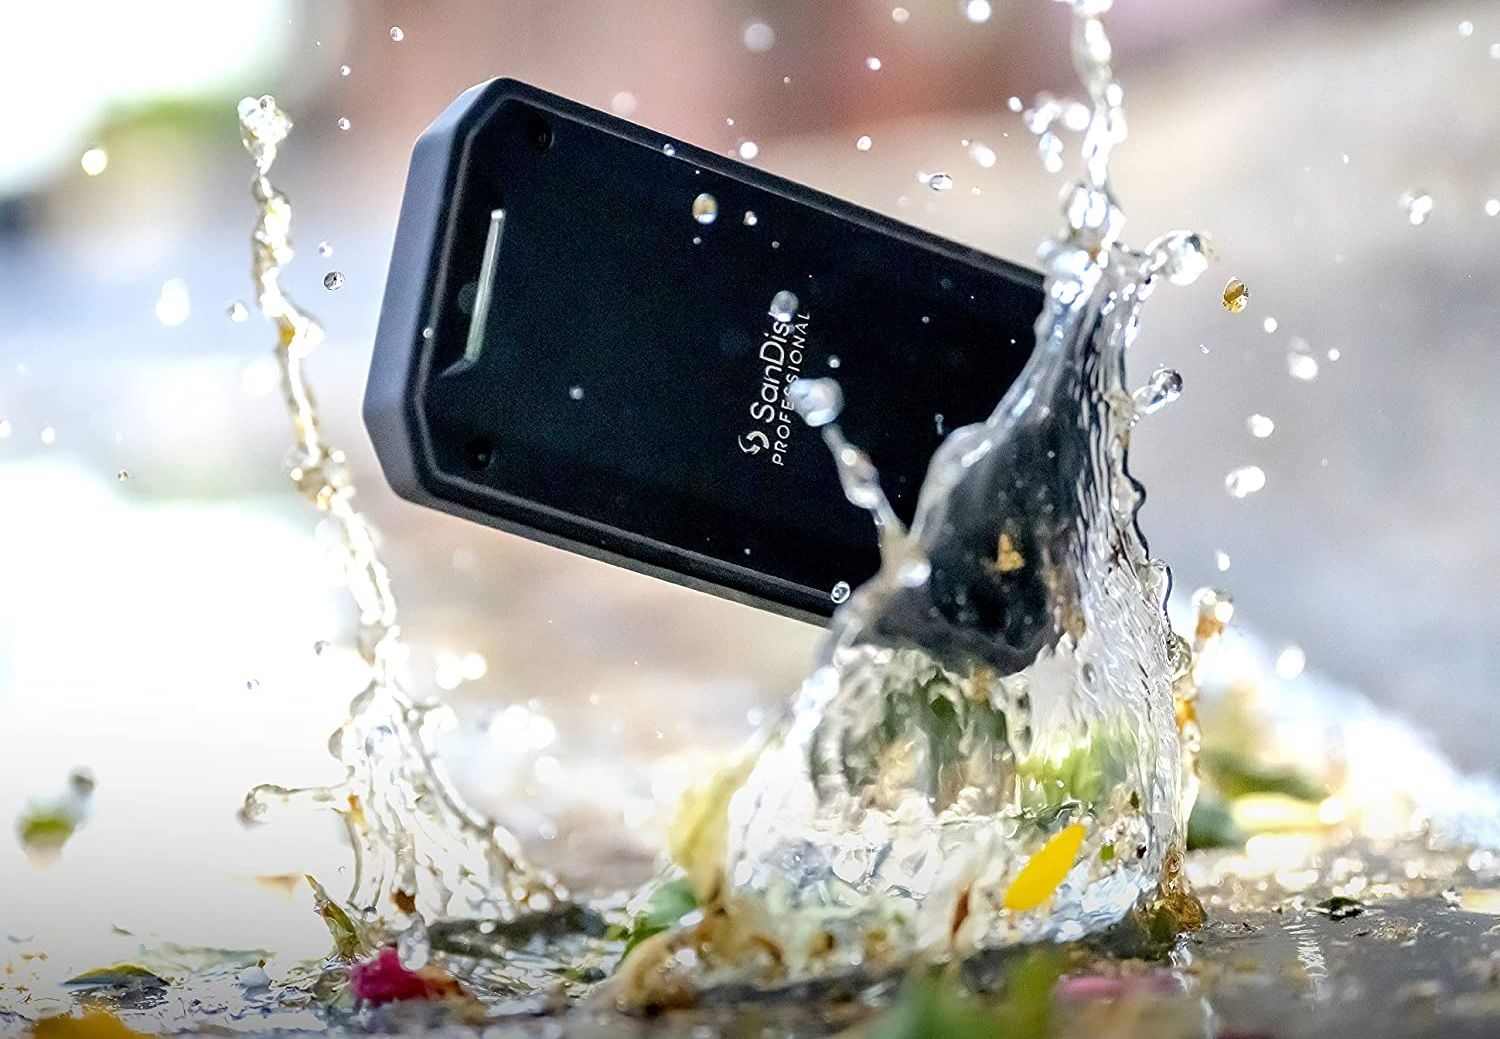 sandisk professional pro-g40 external ssd falling into water